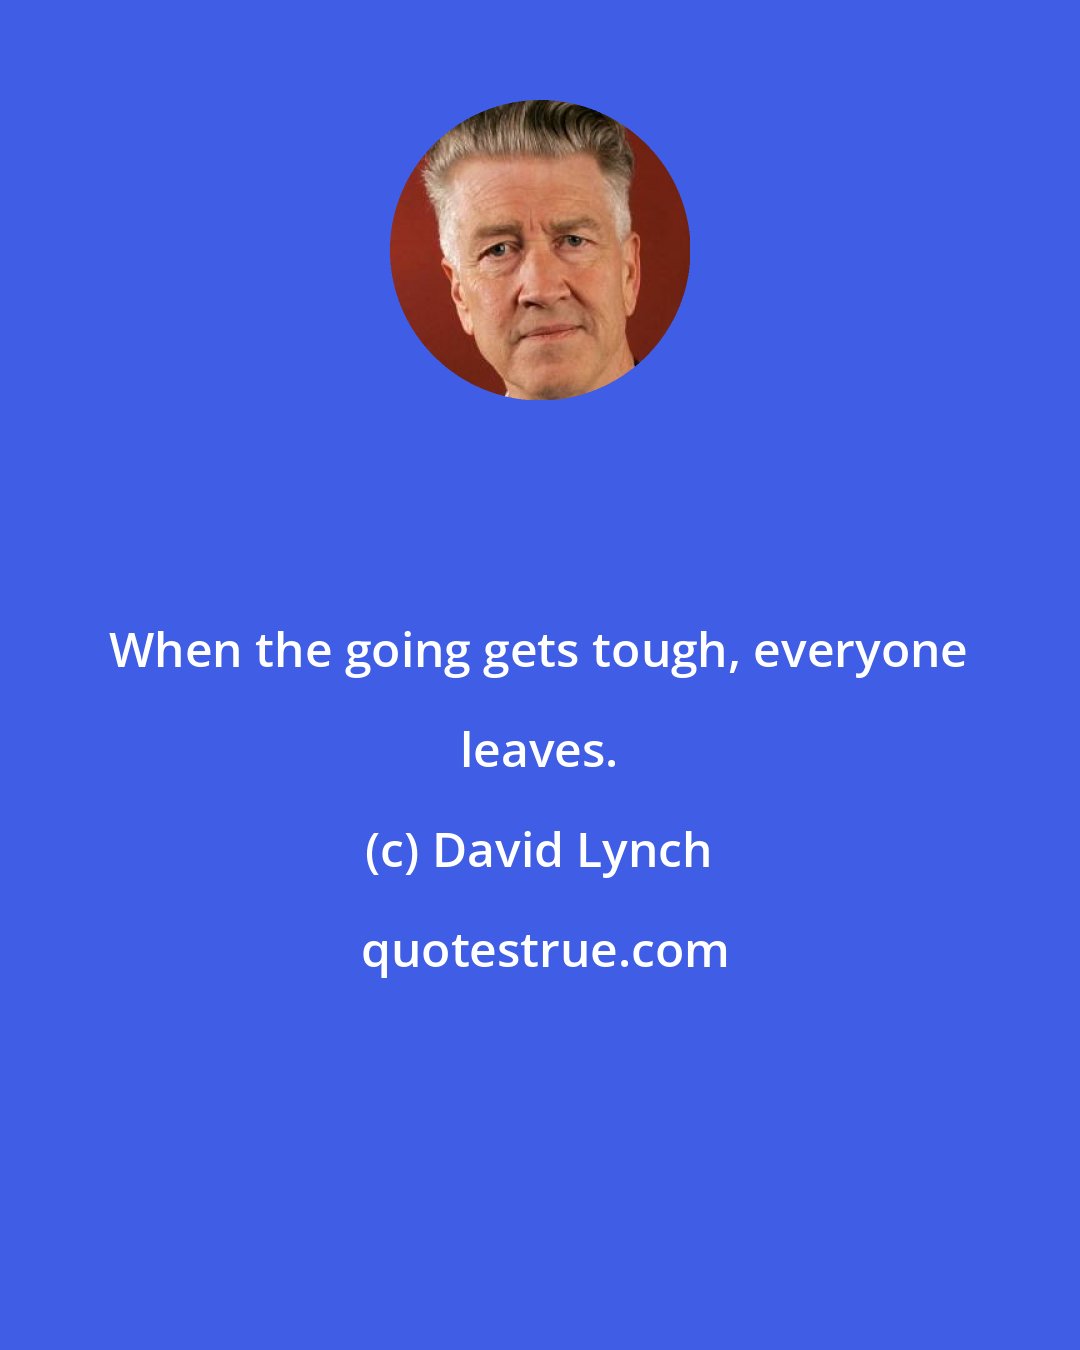 David Lynch: When the going gets tough, everyone leaves.